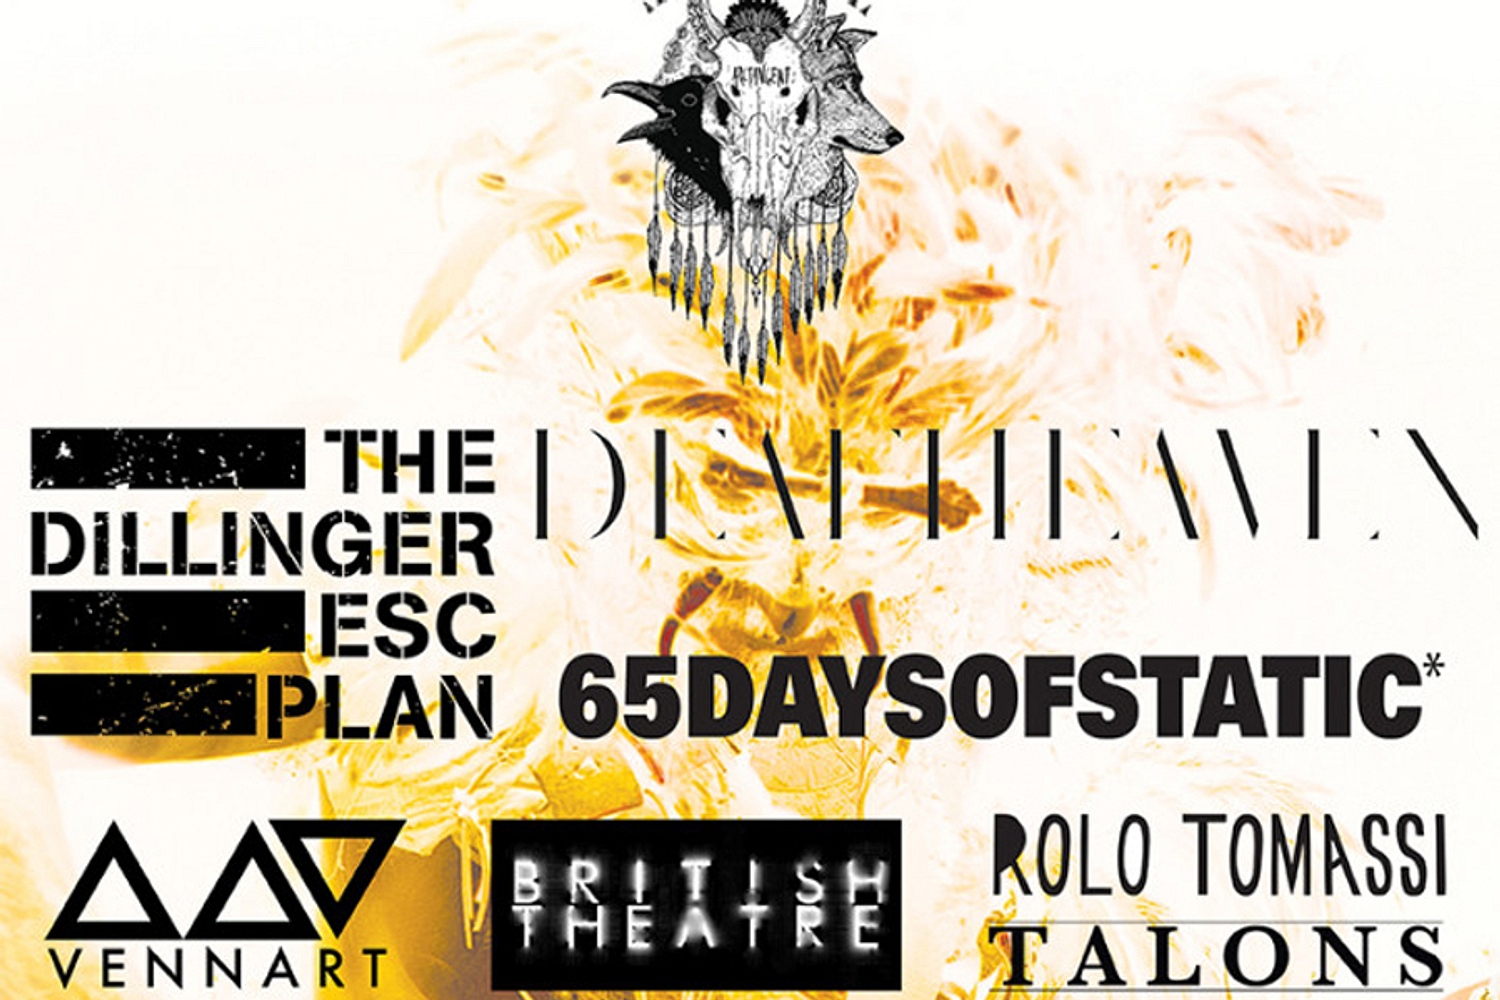 Deafheaven added to this year’s ArcTanGent 2015